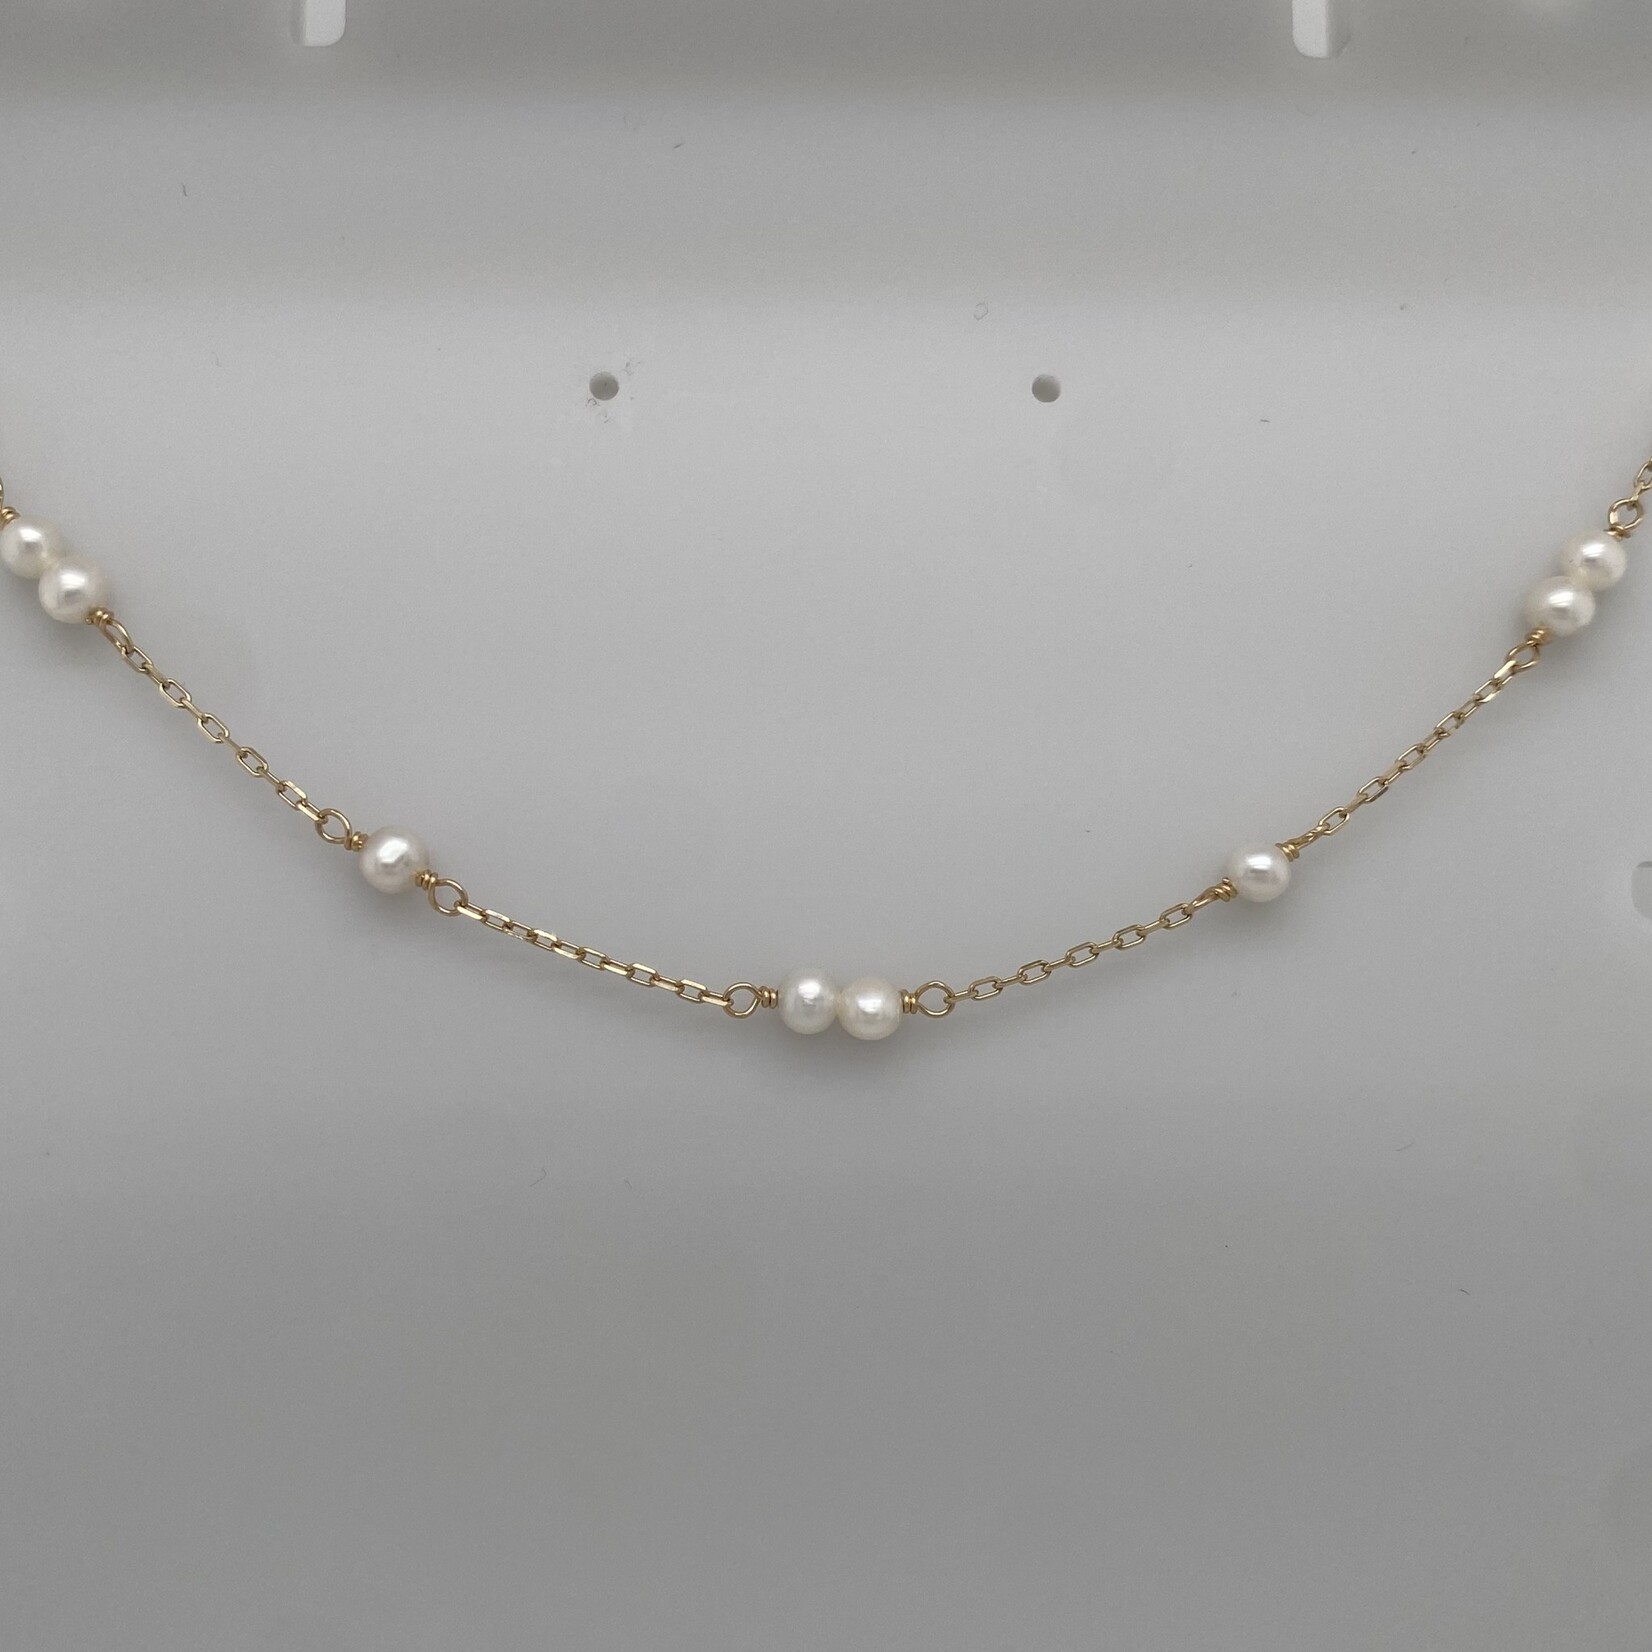 14 Kt Yellow Gold Peach White Pearl Anklet 9"